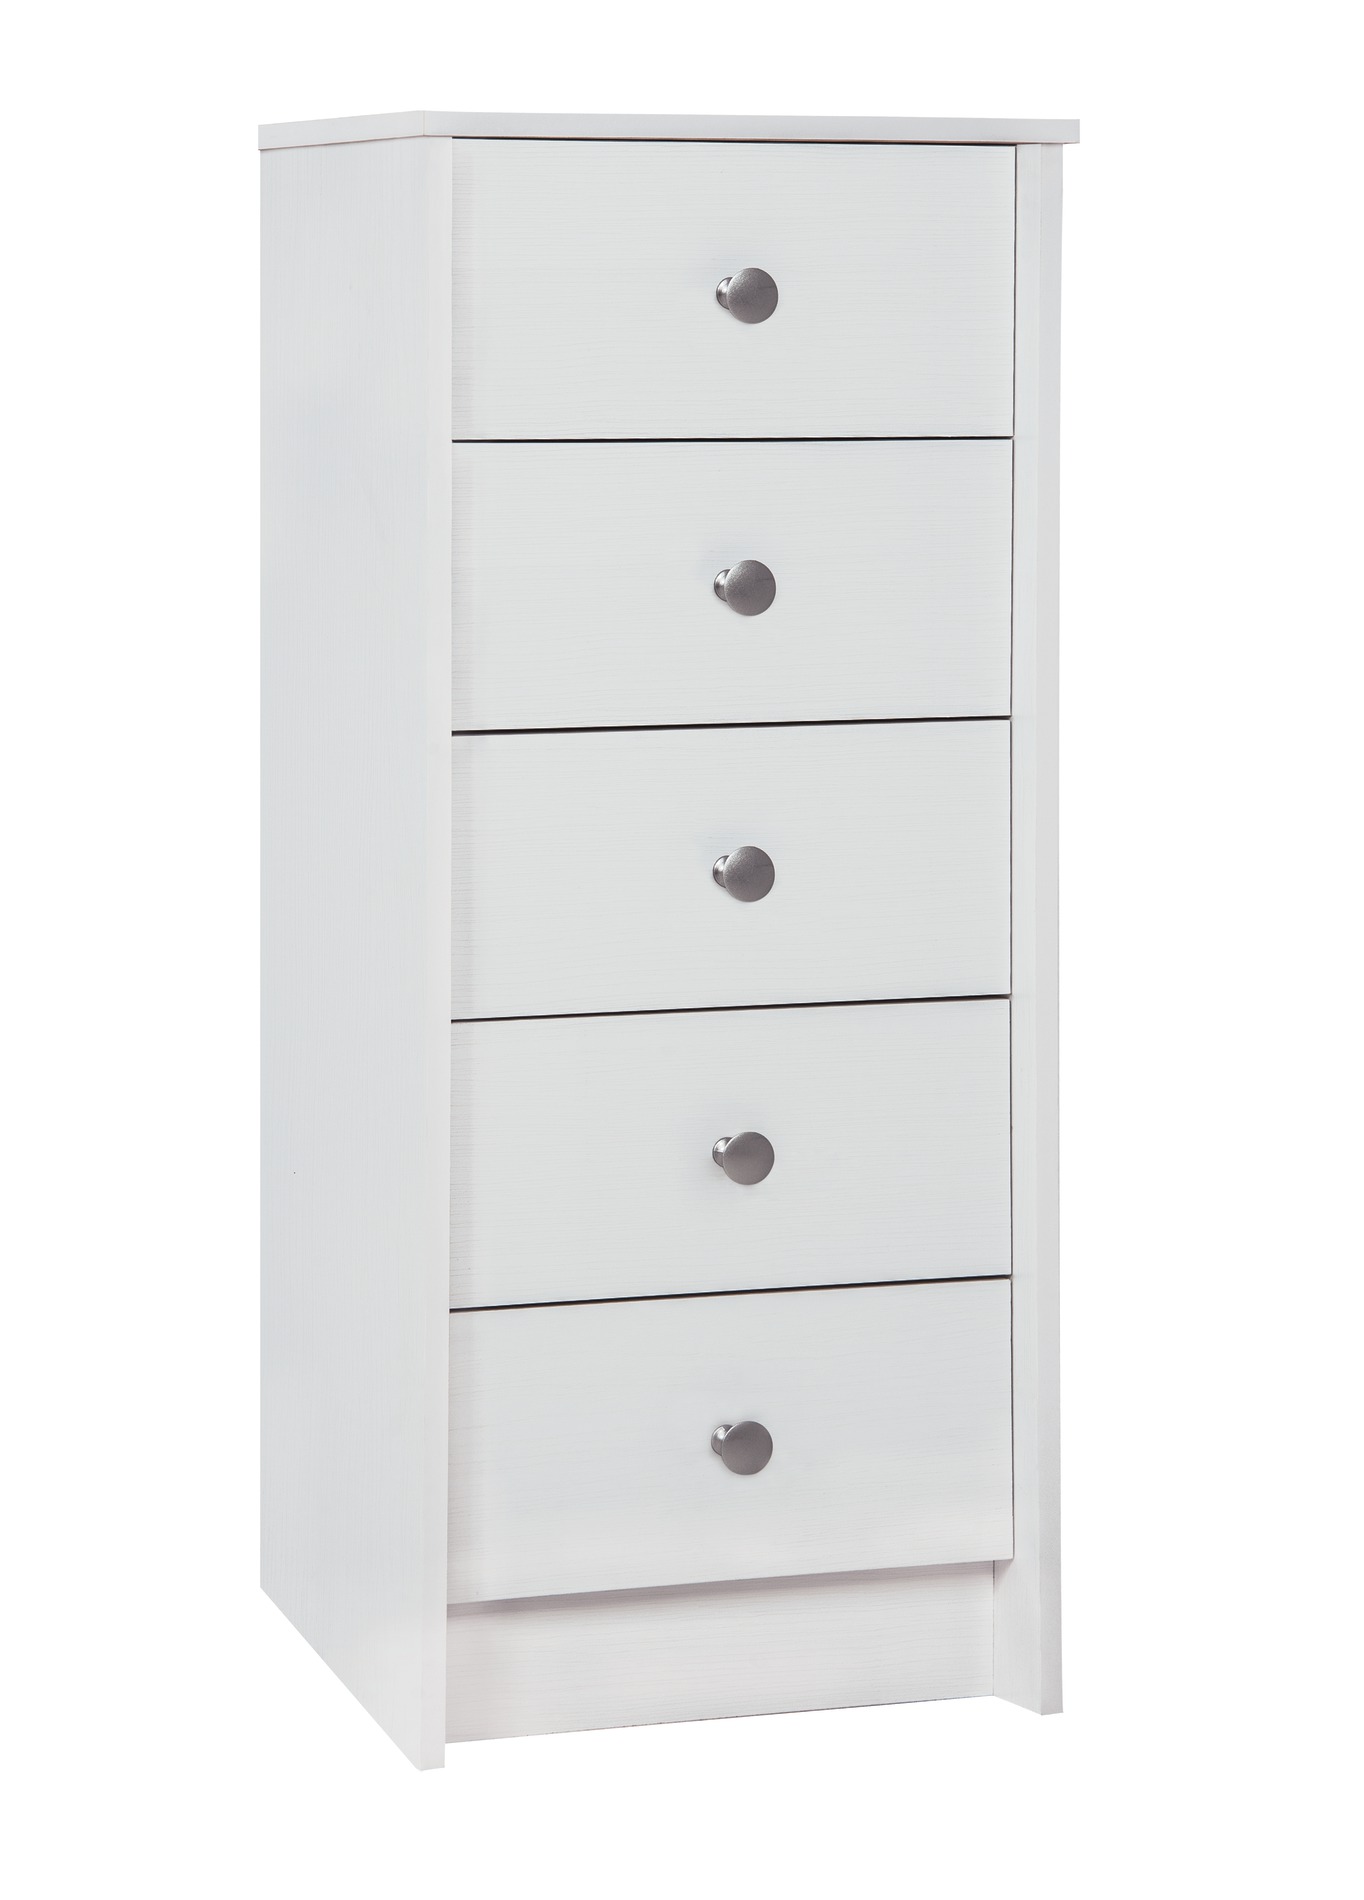 Essential Home Belmont 2.0 5-Drawer Lingerie Chest